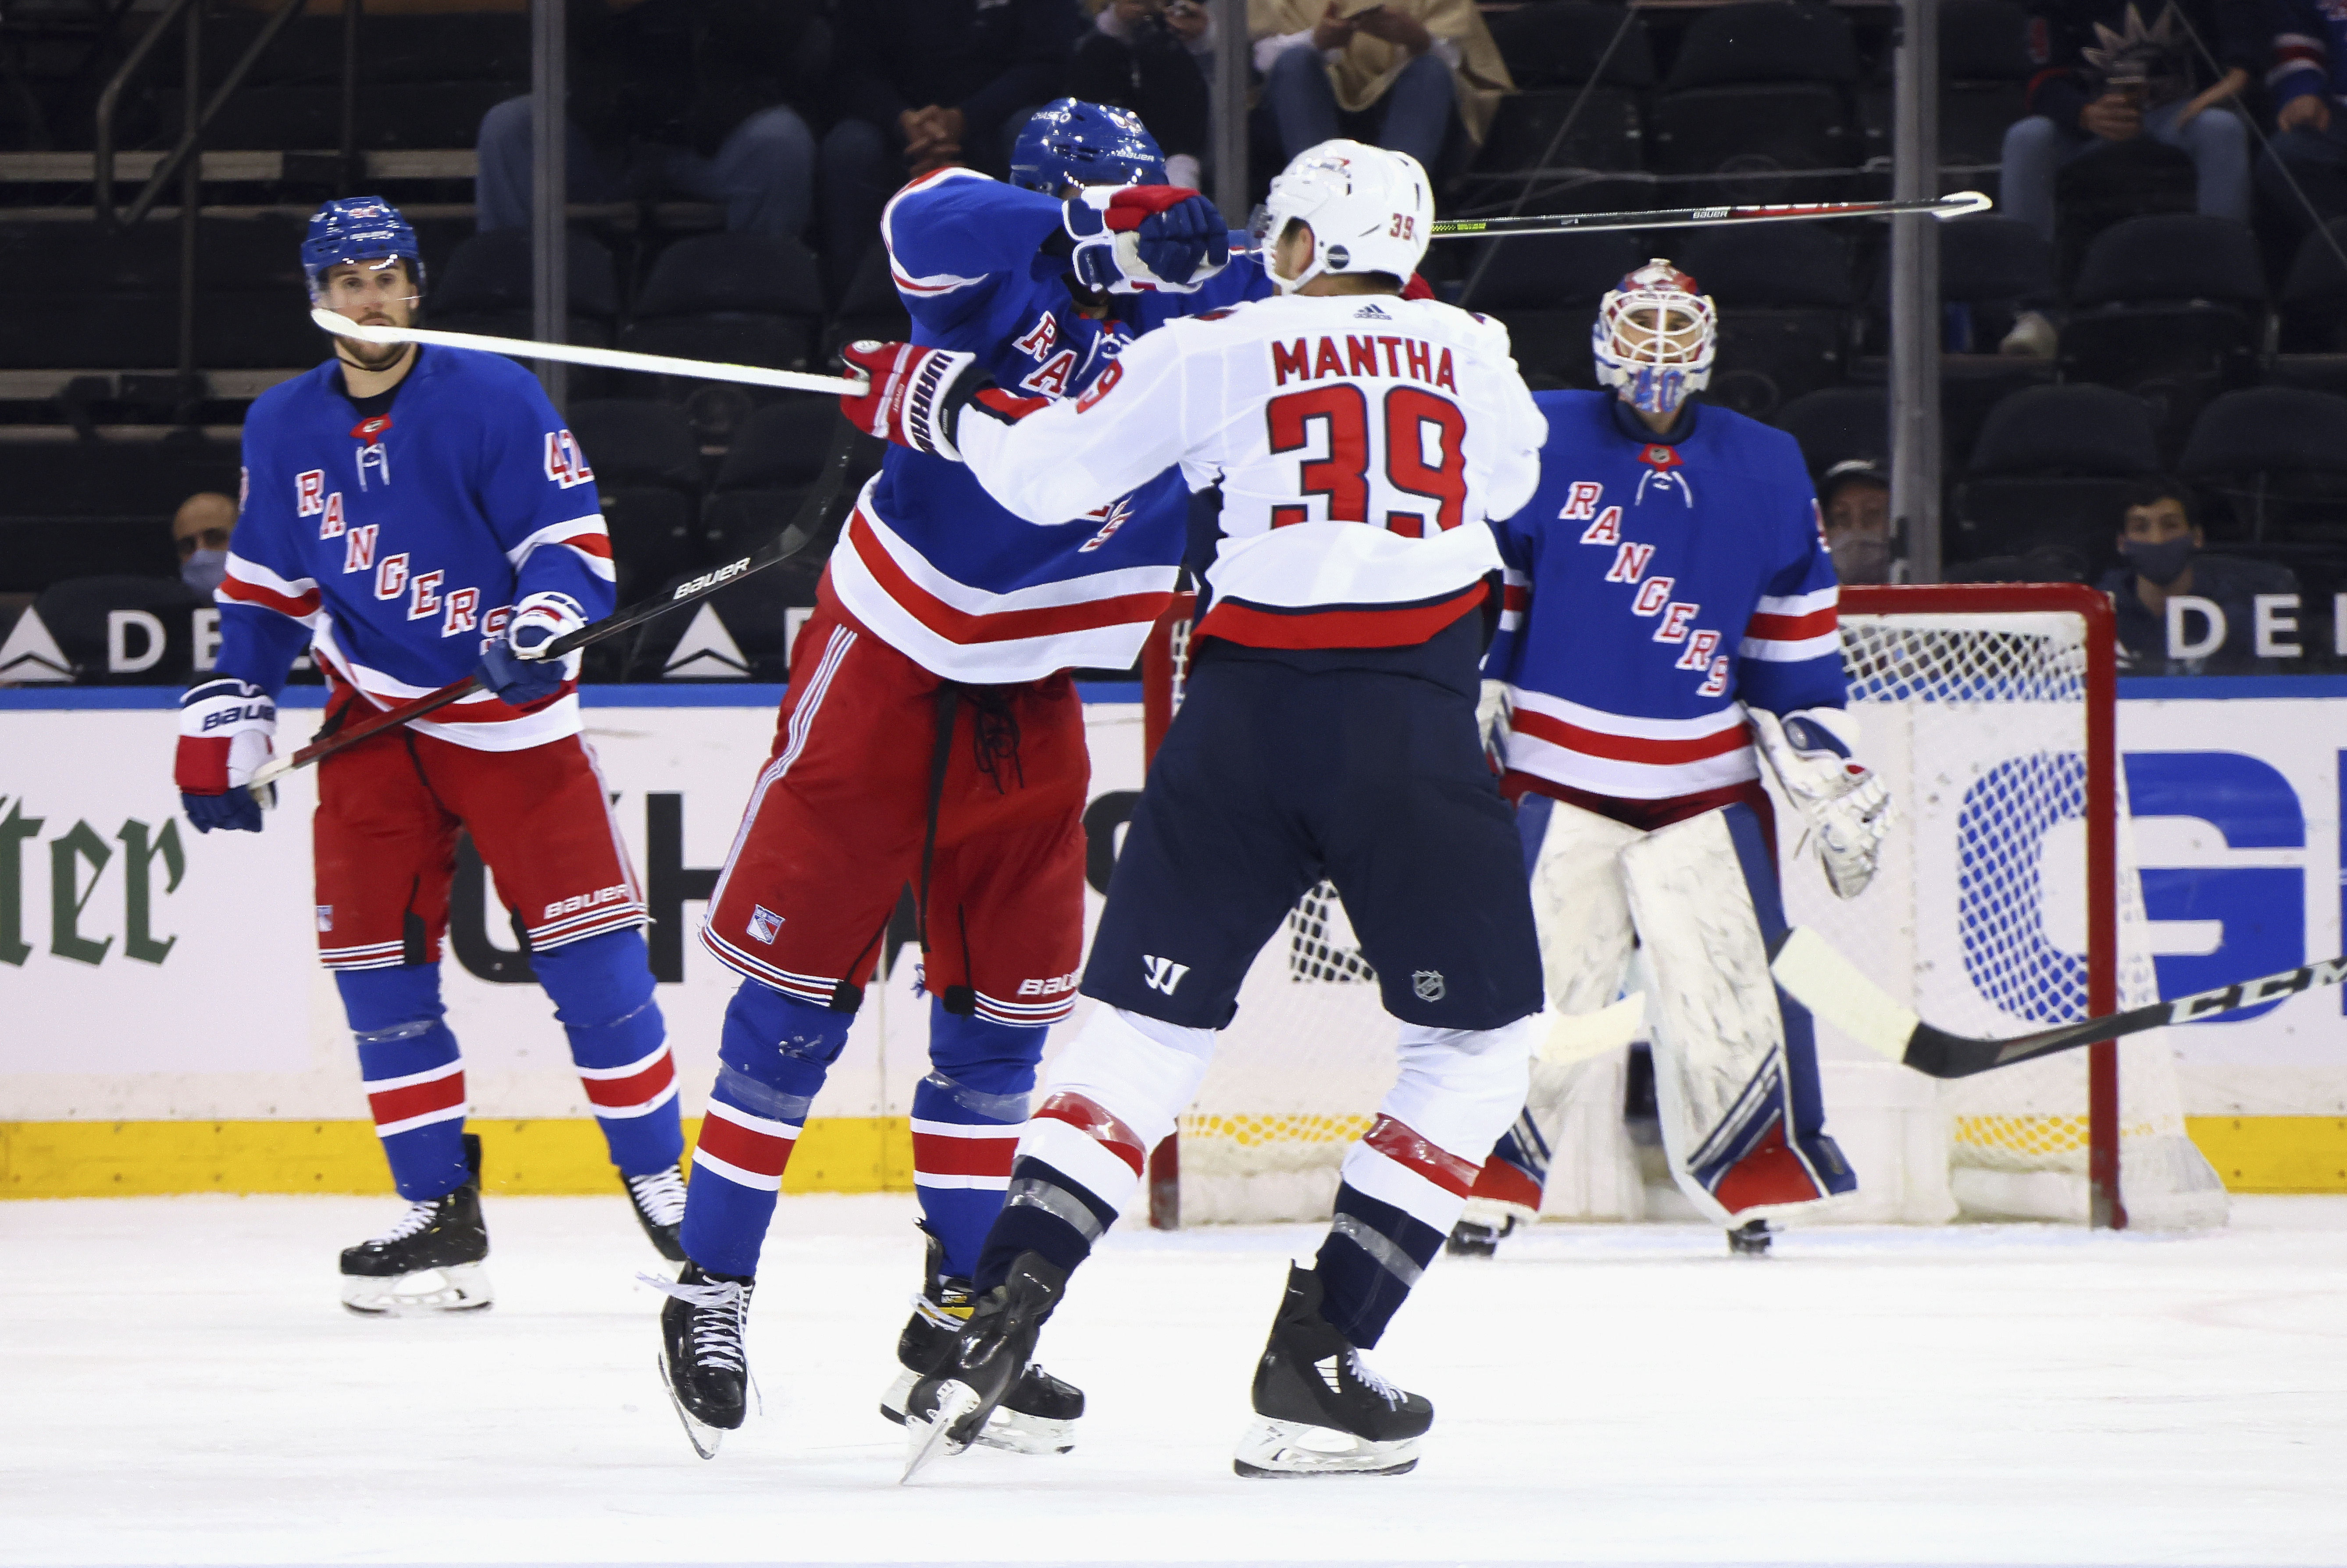 NHL hockey fighting: The Rangers, the Capitals, and Tom Wilson